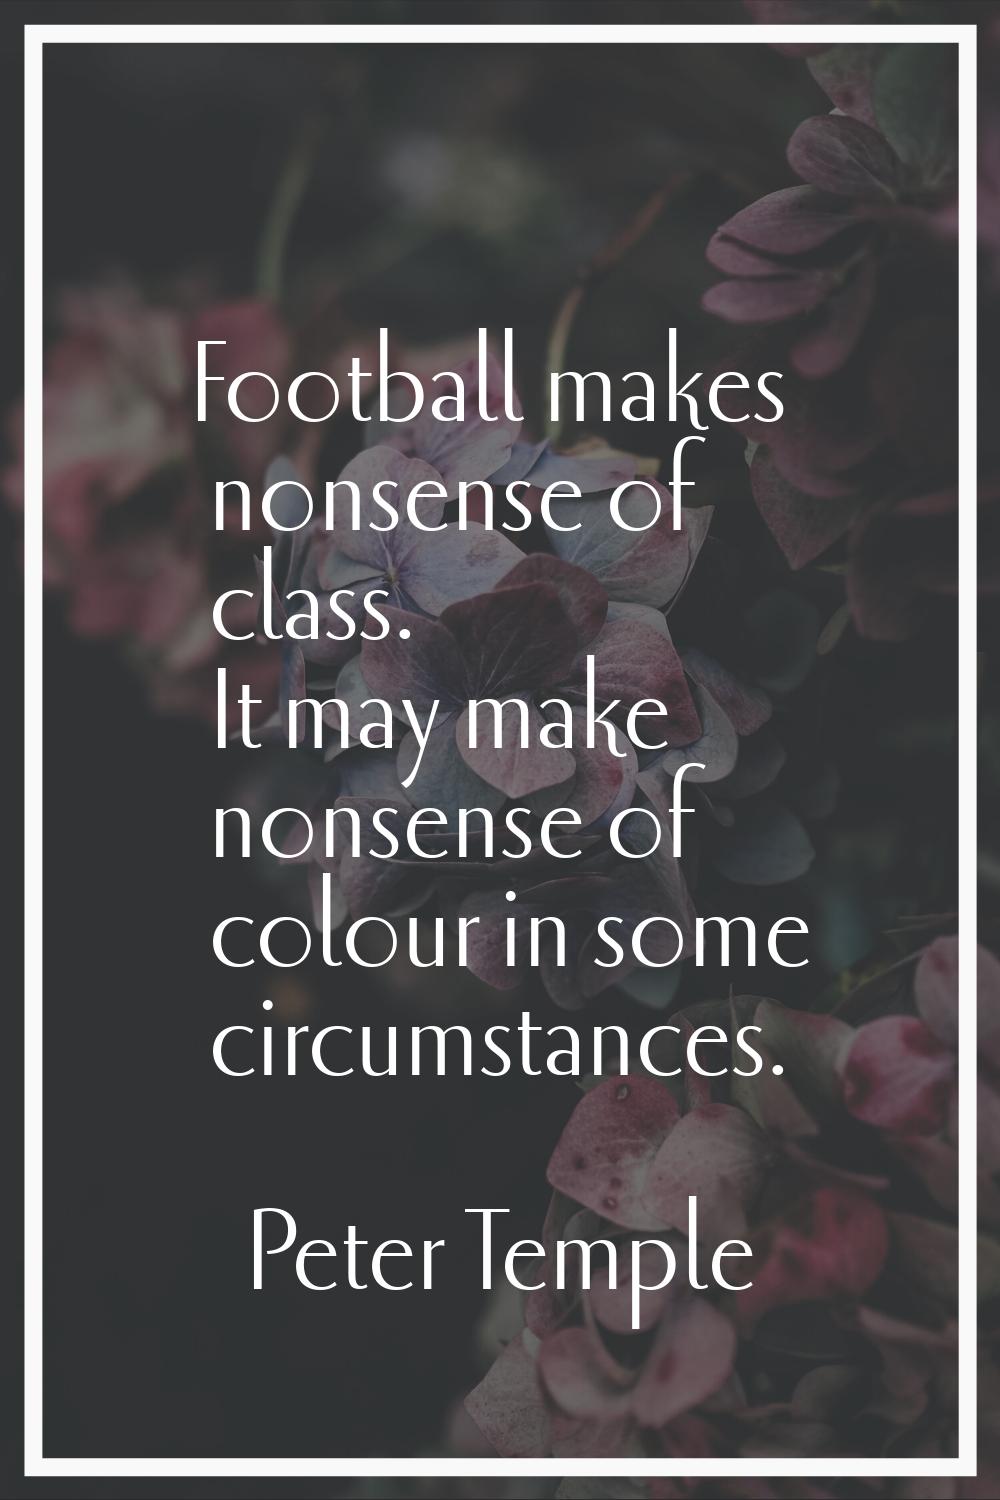 Football makes nonsense of class. It may make nonsense of colour in some circumstances.